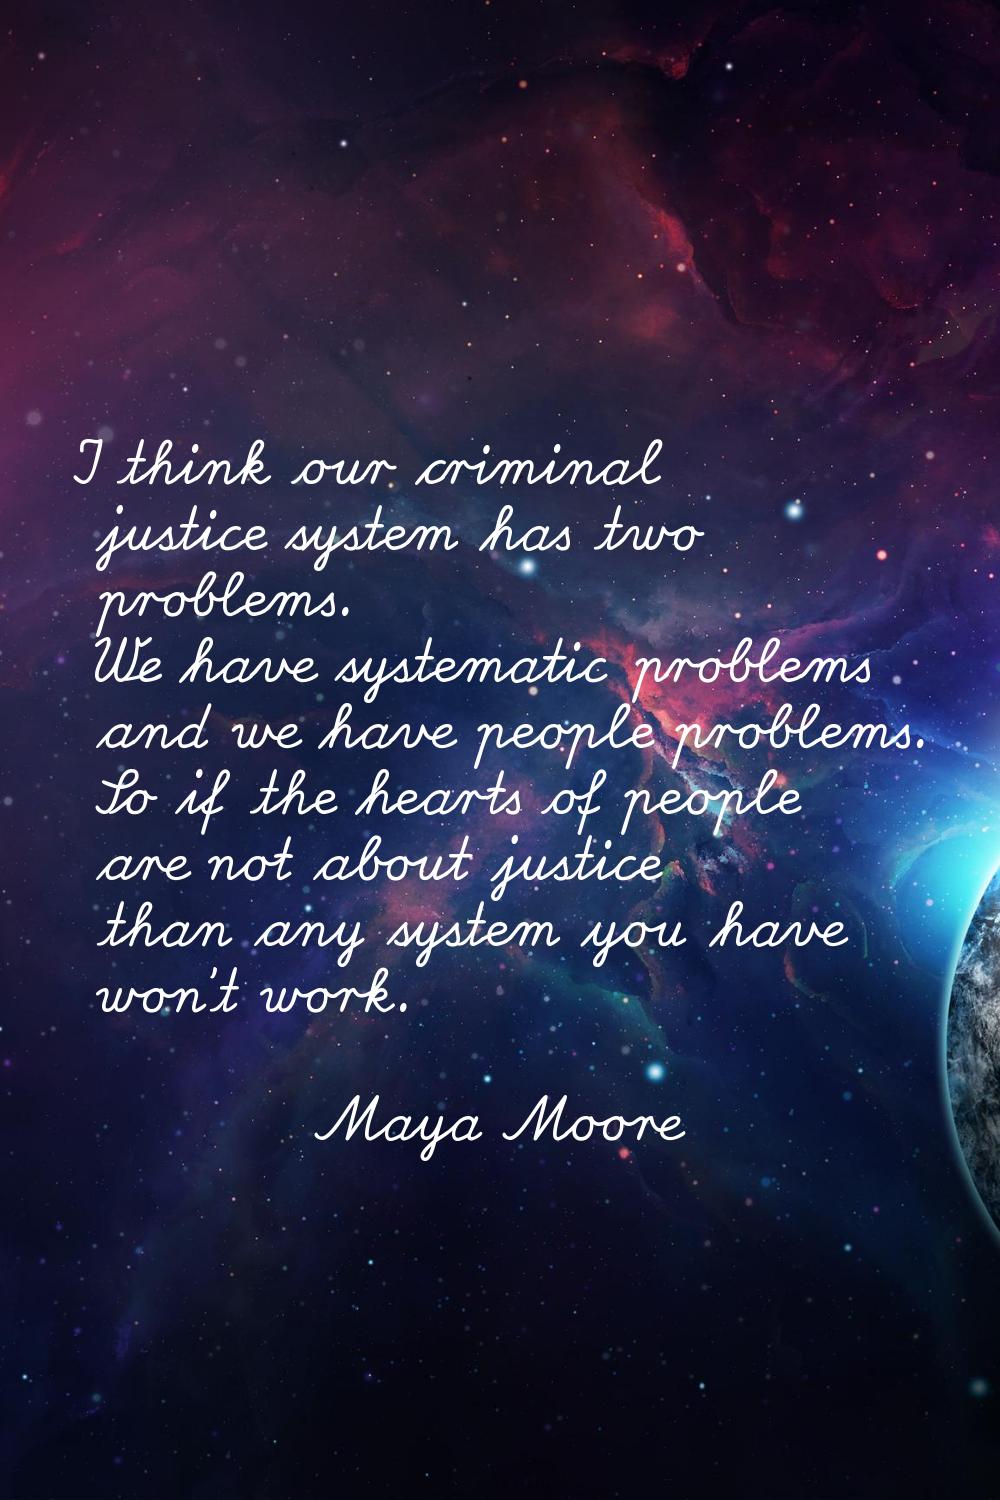 I think our criminal justice system has two problems. We have systematic problems and we have peopl